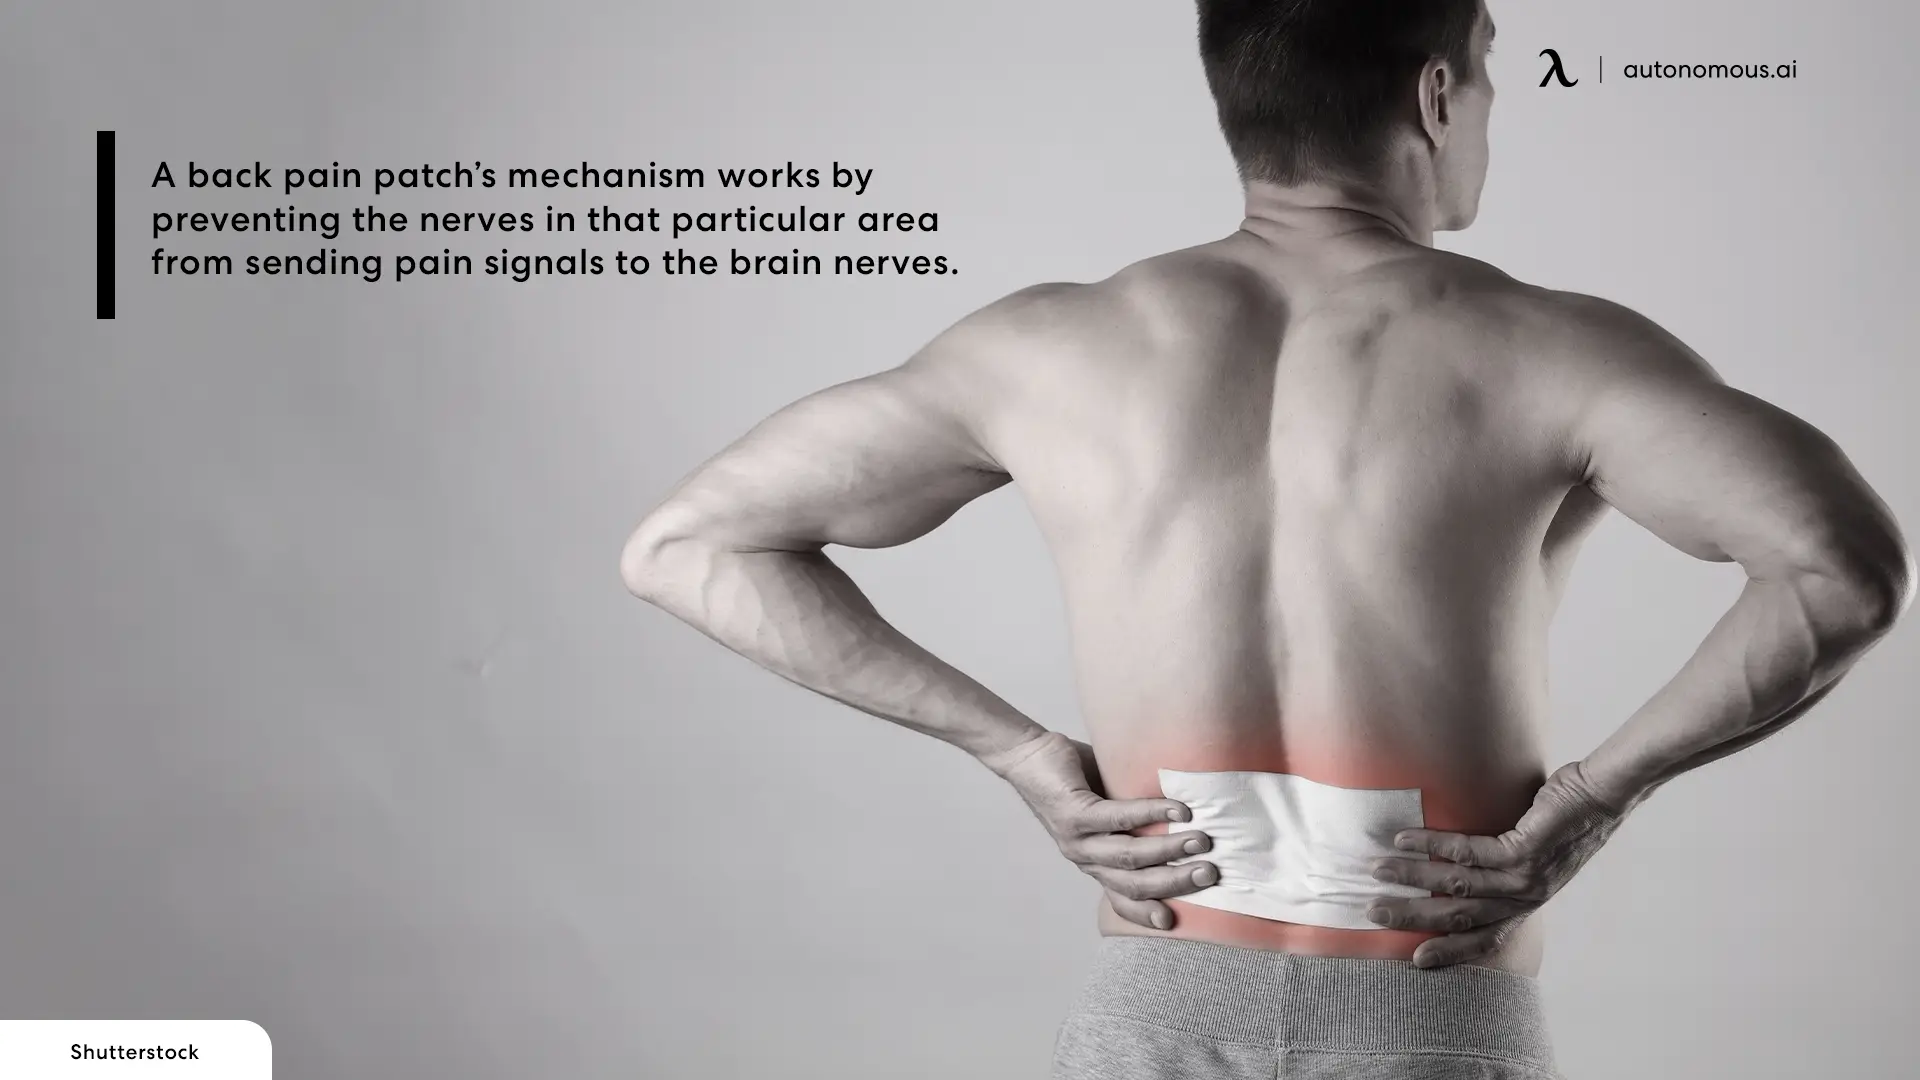 How Does a Back Pain Patch Work?